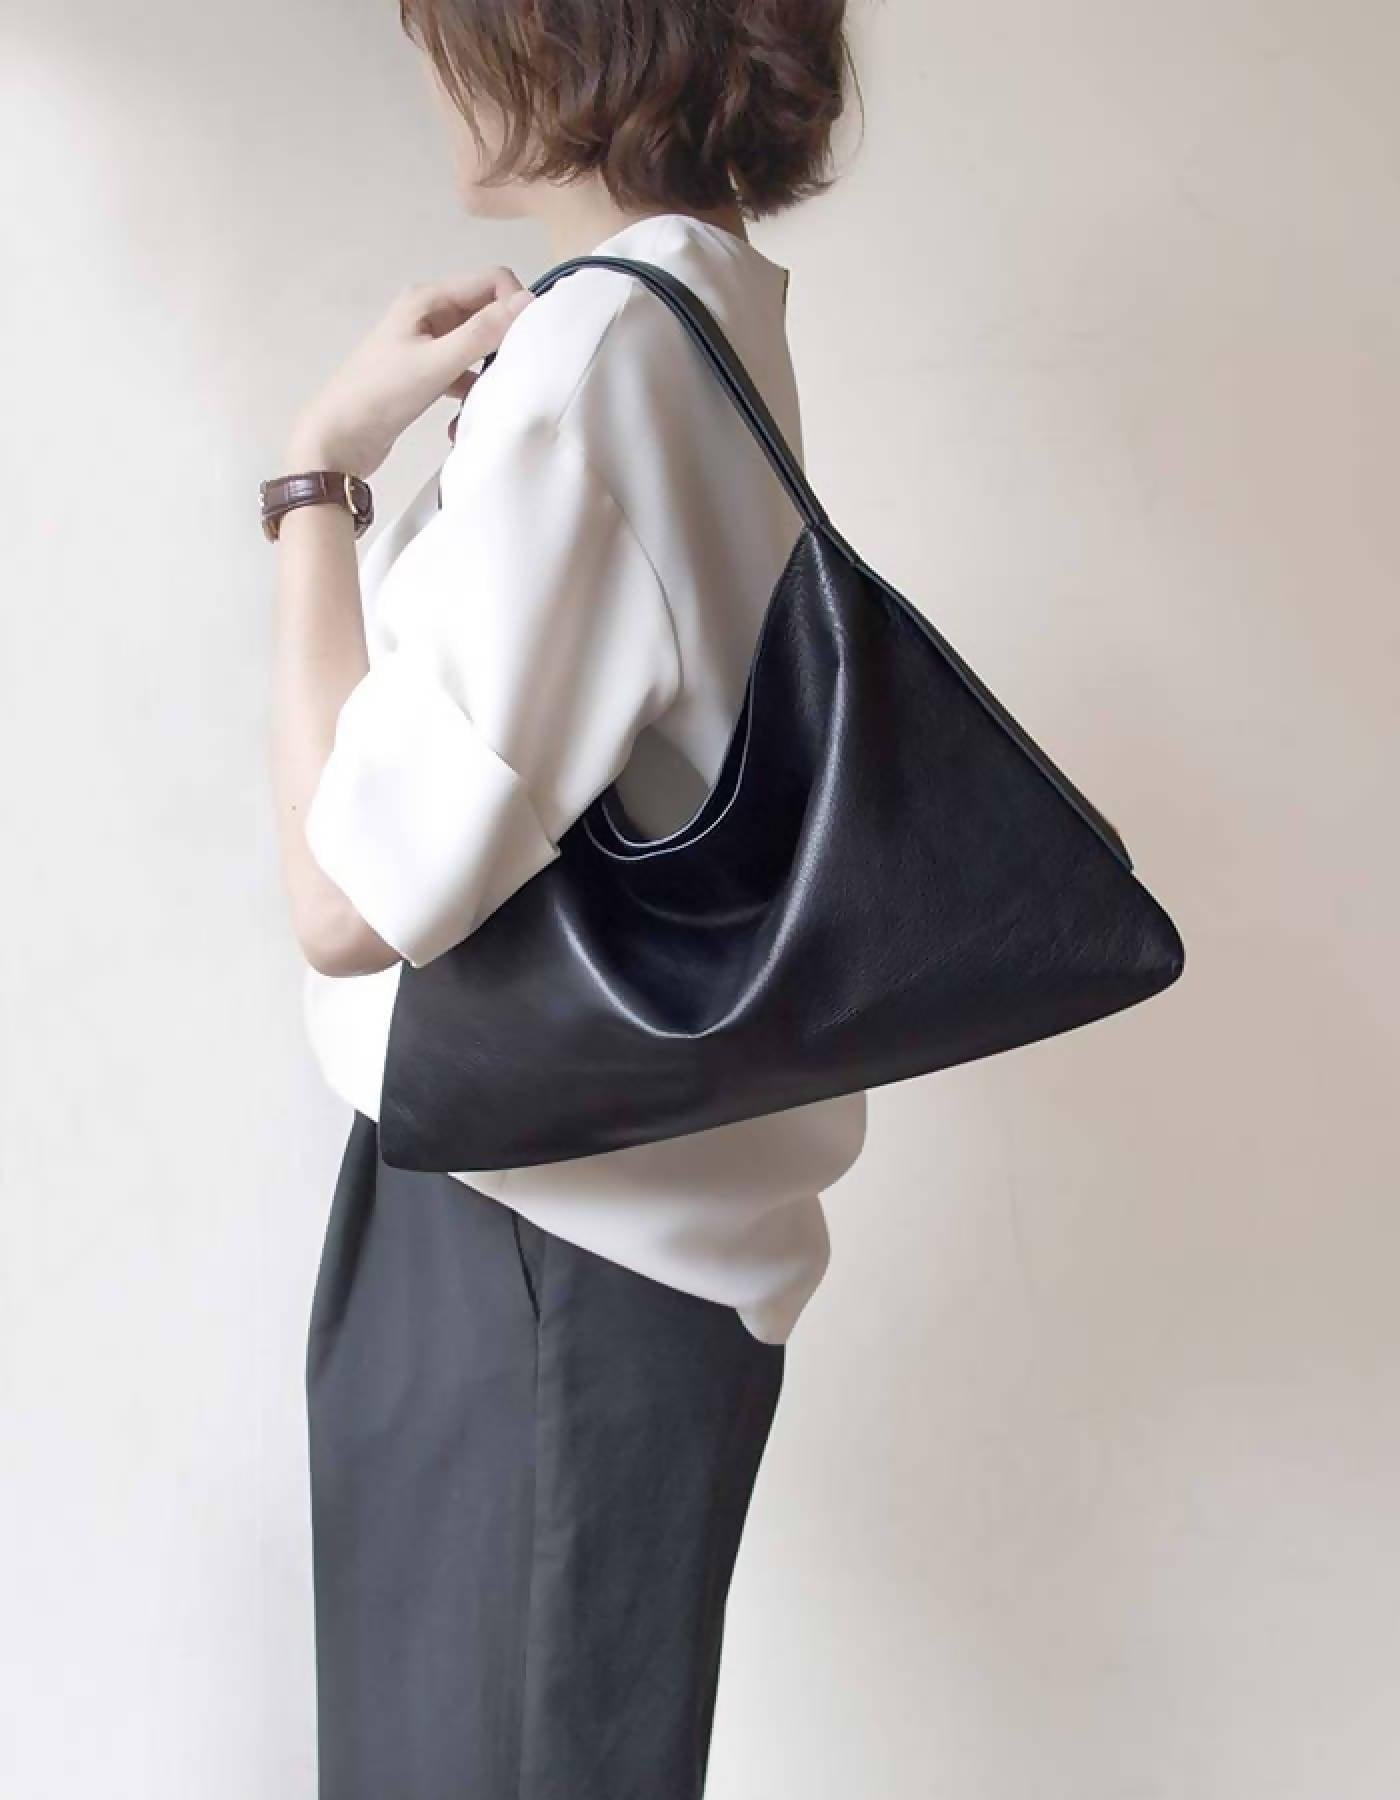 Equilateral Triangle Hobo Bag by DARKER THAN BLACK BAGS